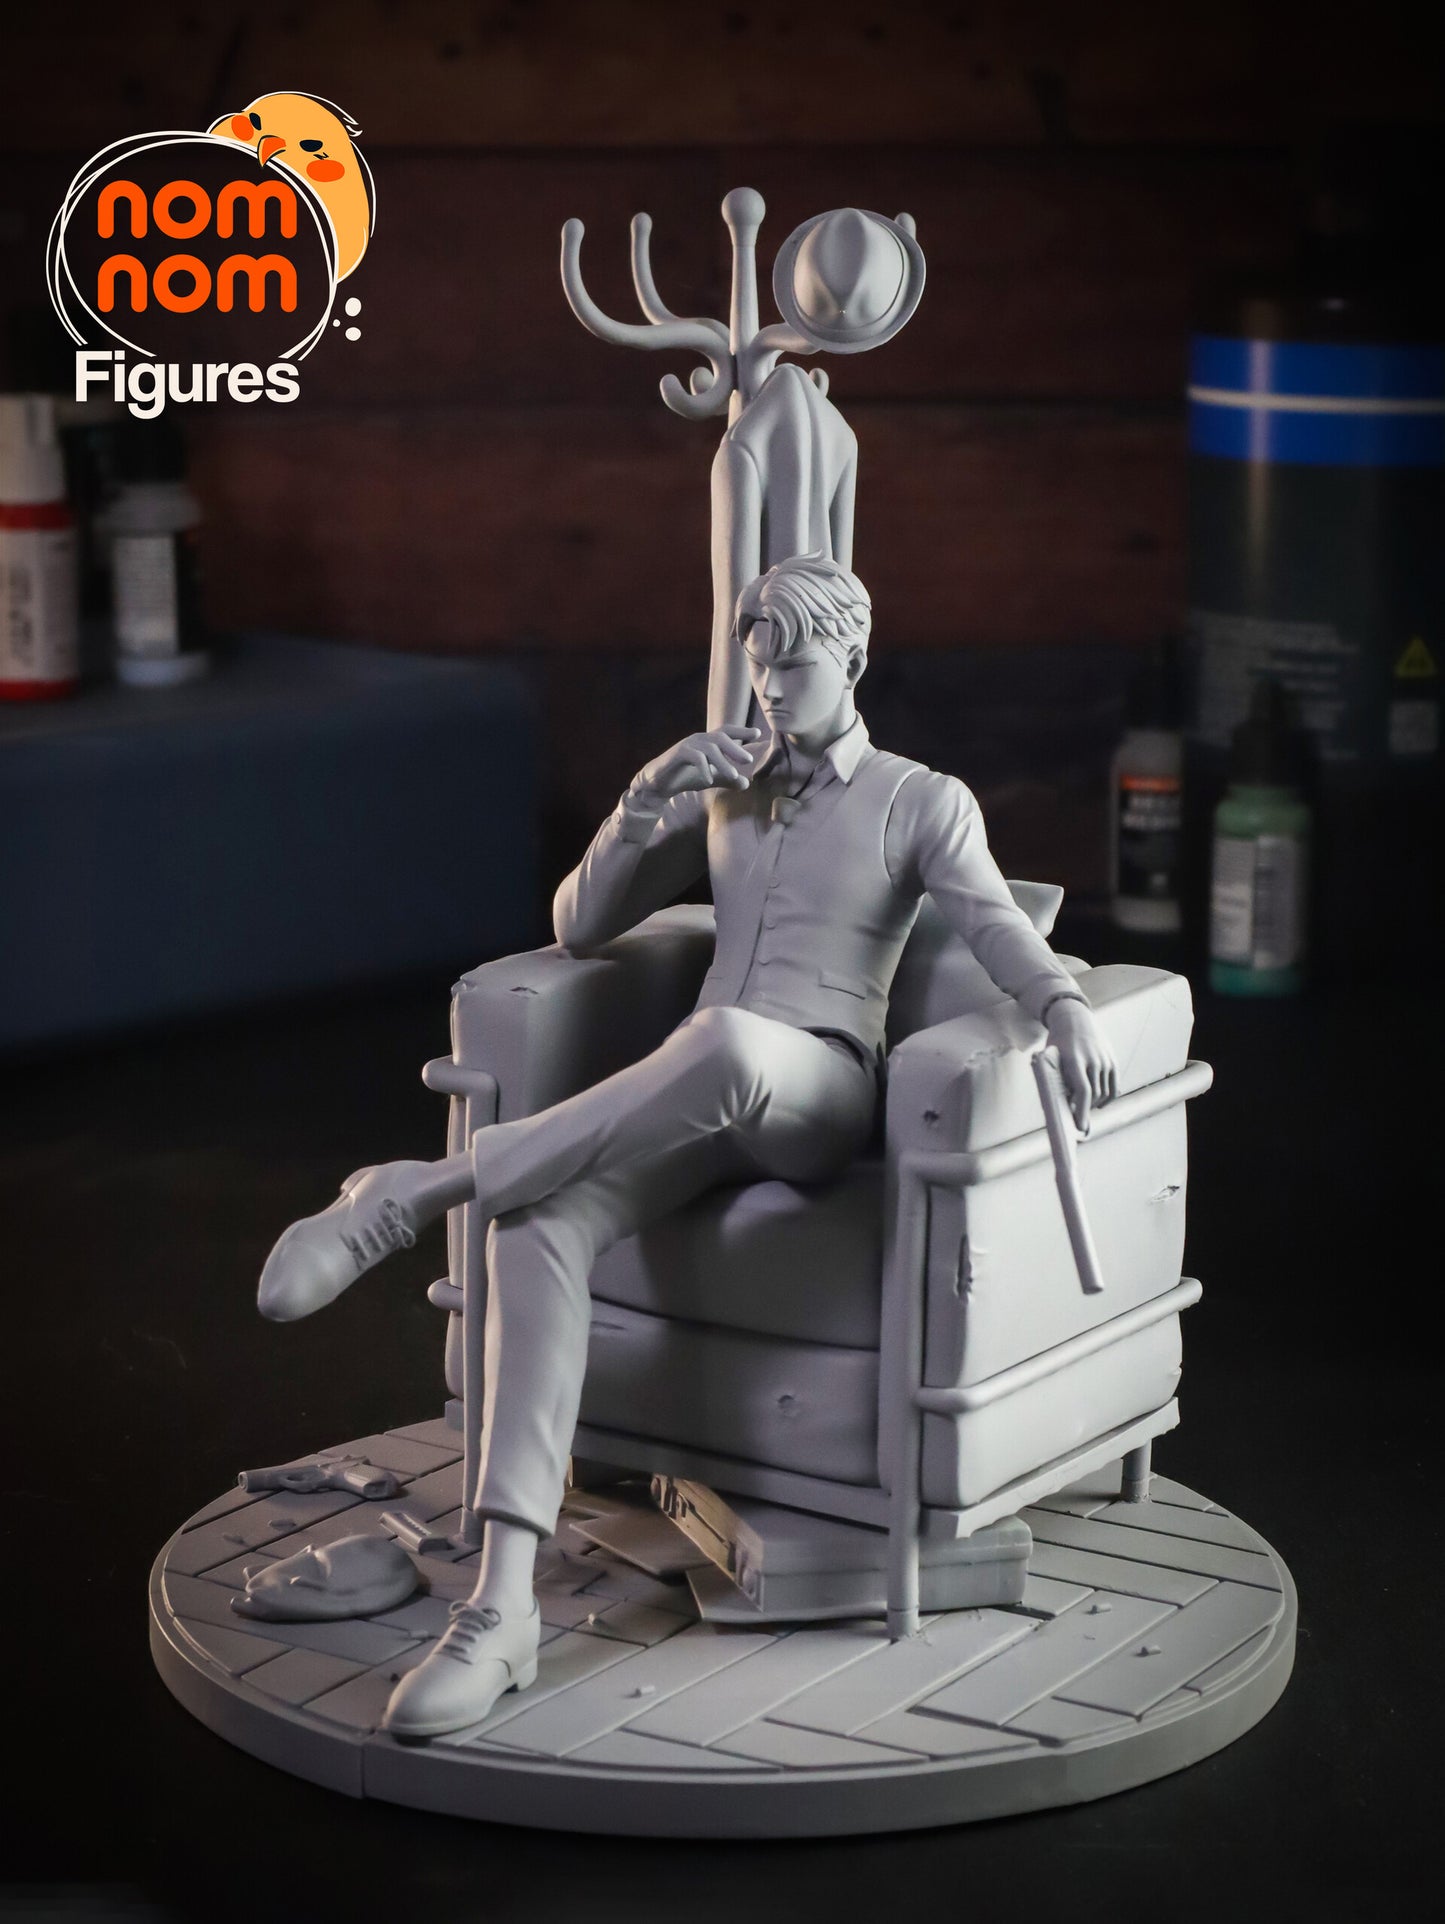 Loid Forger - SpyXFamily 3D Printed Fanmade Model by Nomnom Figures